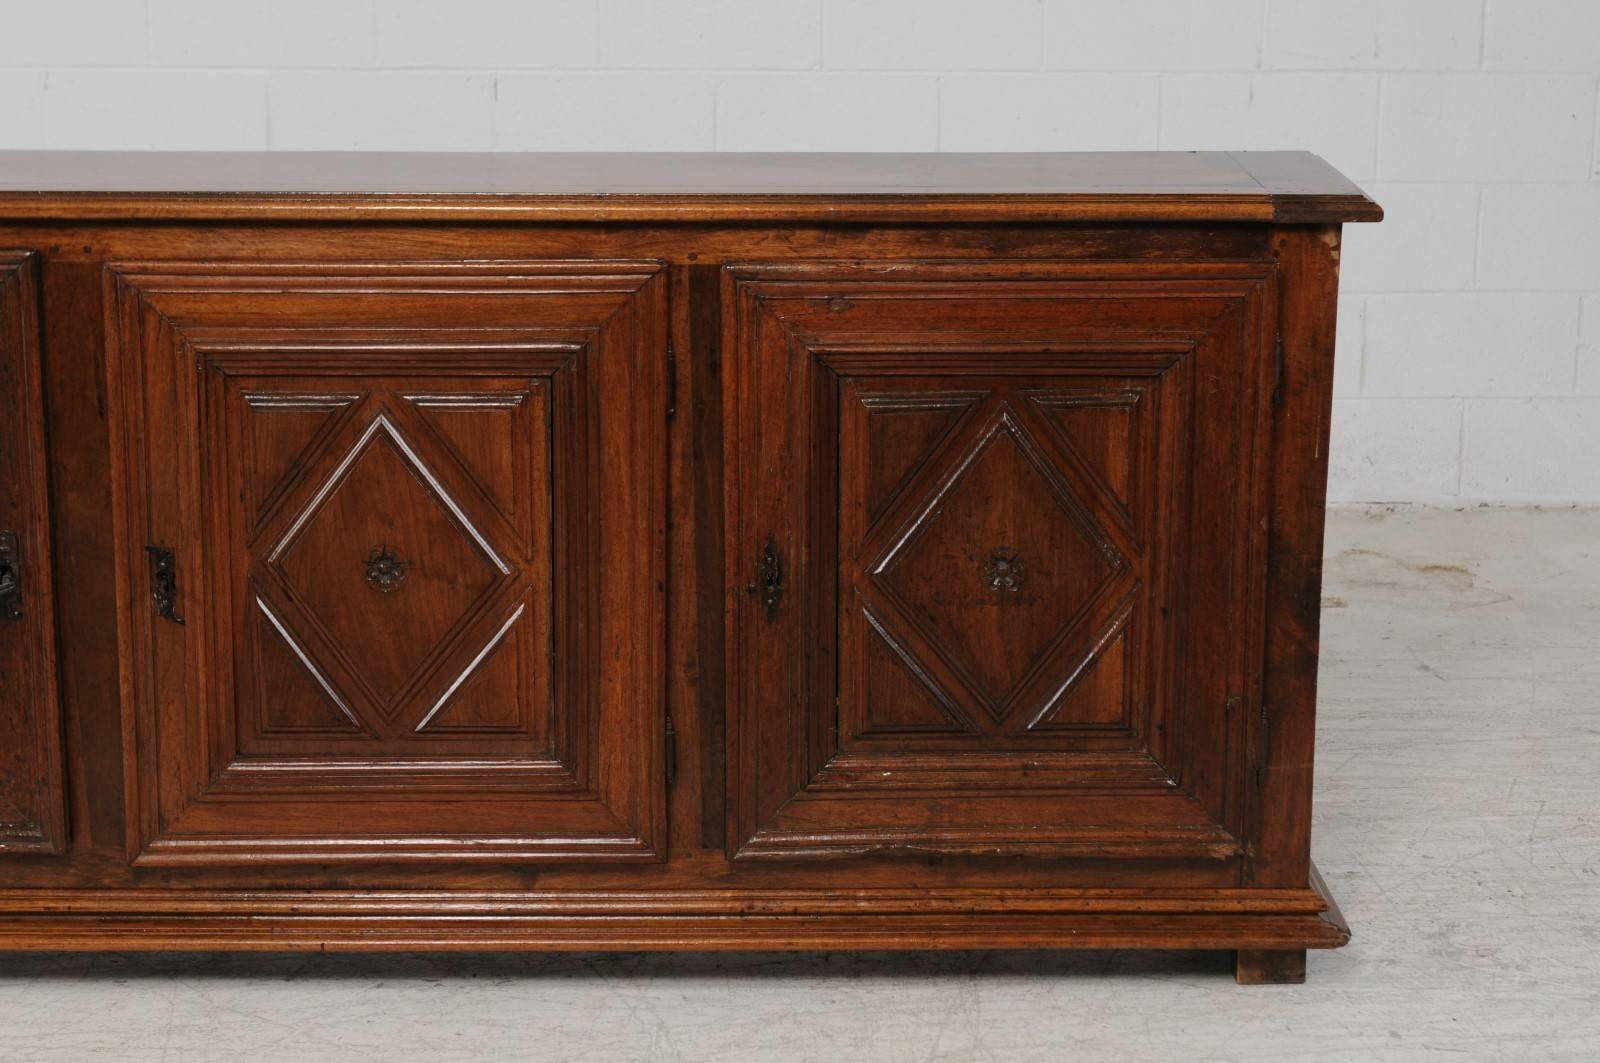 19th Century Italian Three-Door Chestnut Wood Enfilade with Diamond Motifs from the 1820s